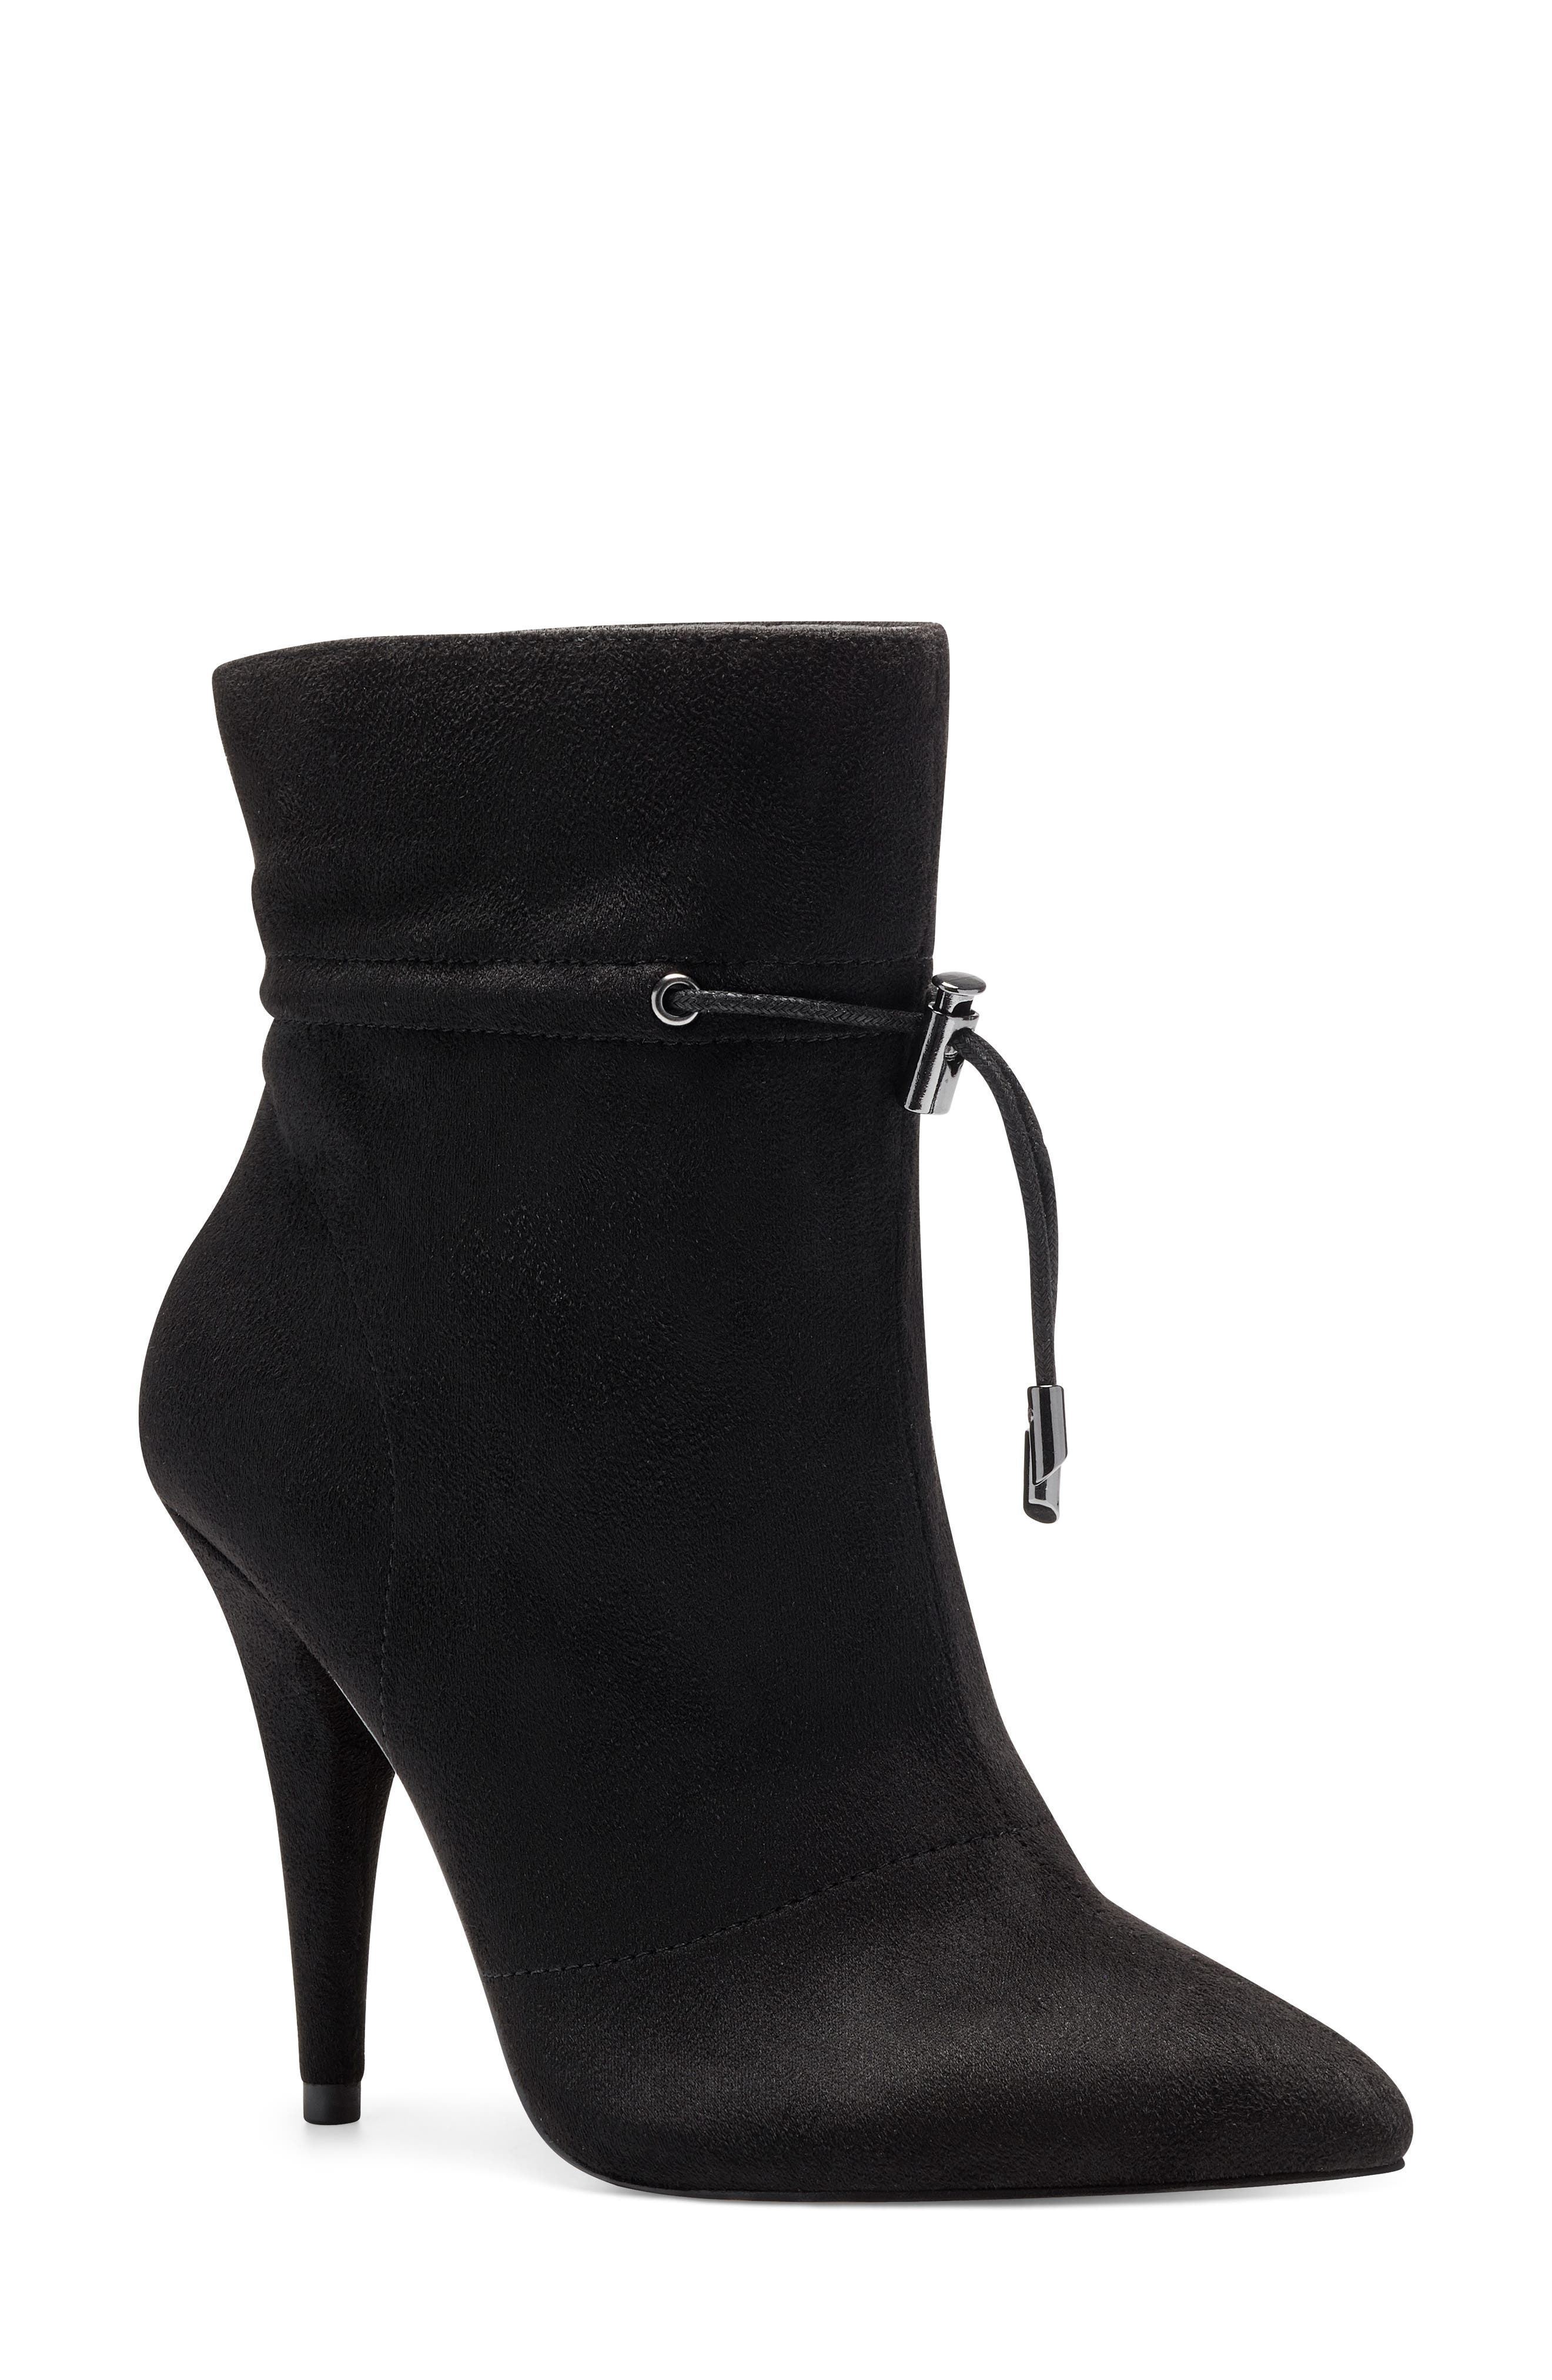 Boots Jessica Simpson Shoes | Nordstrom